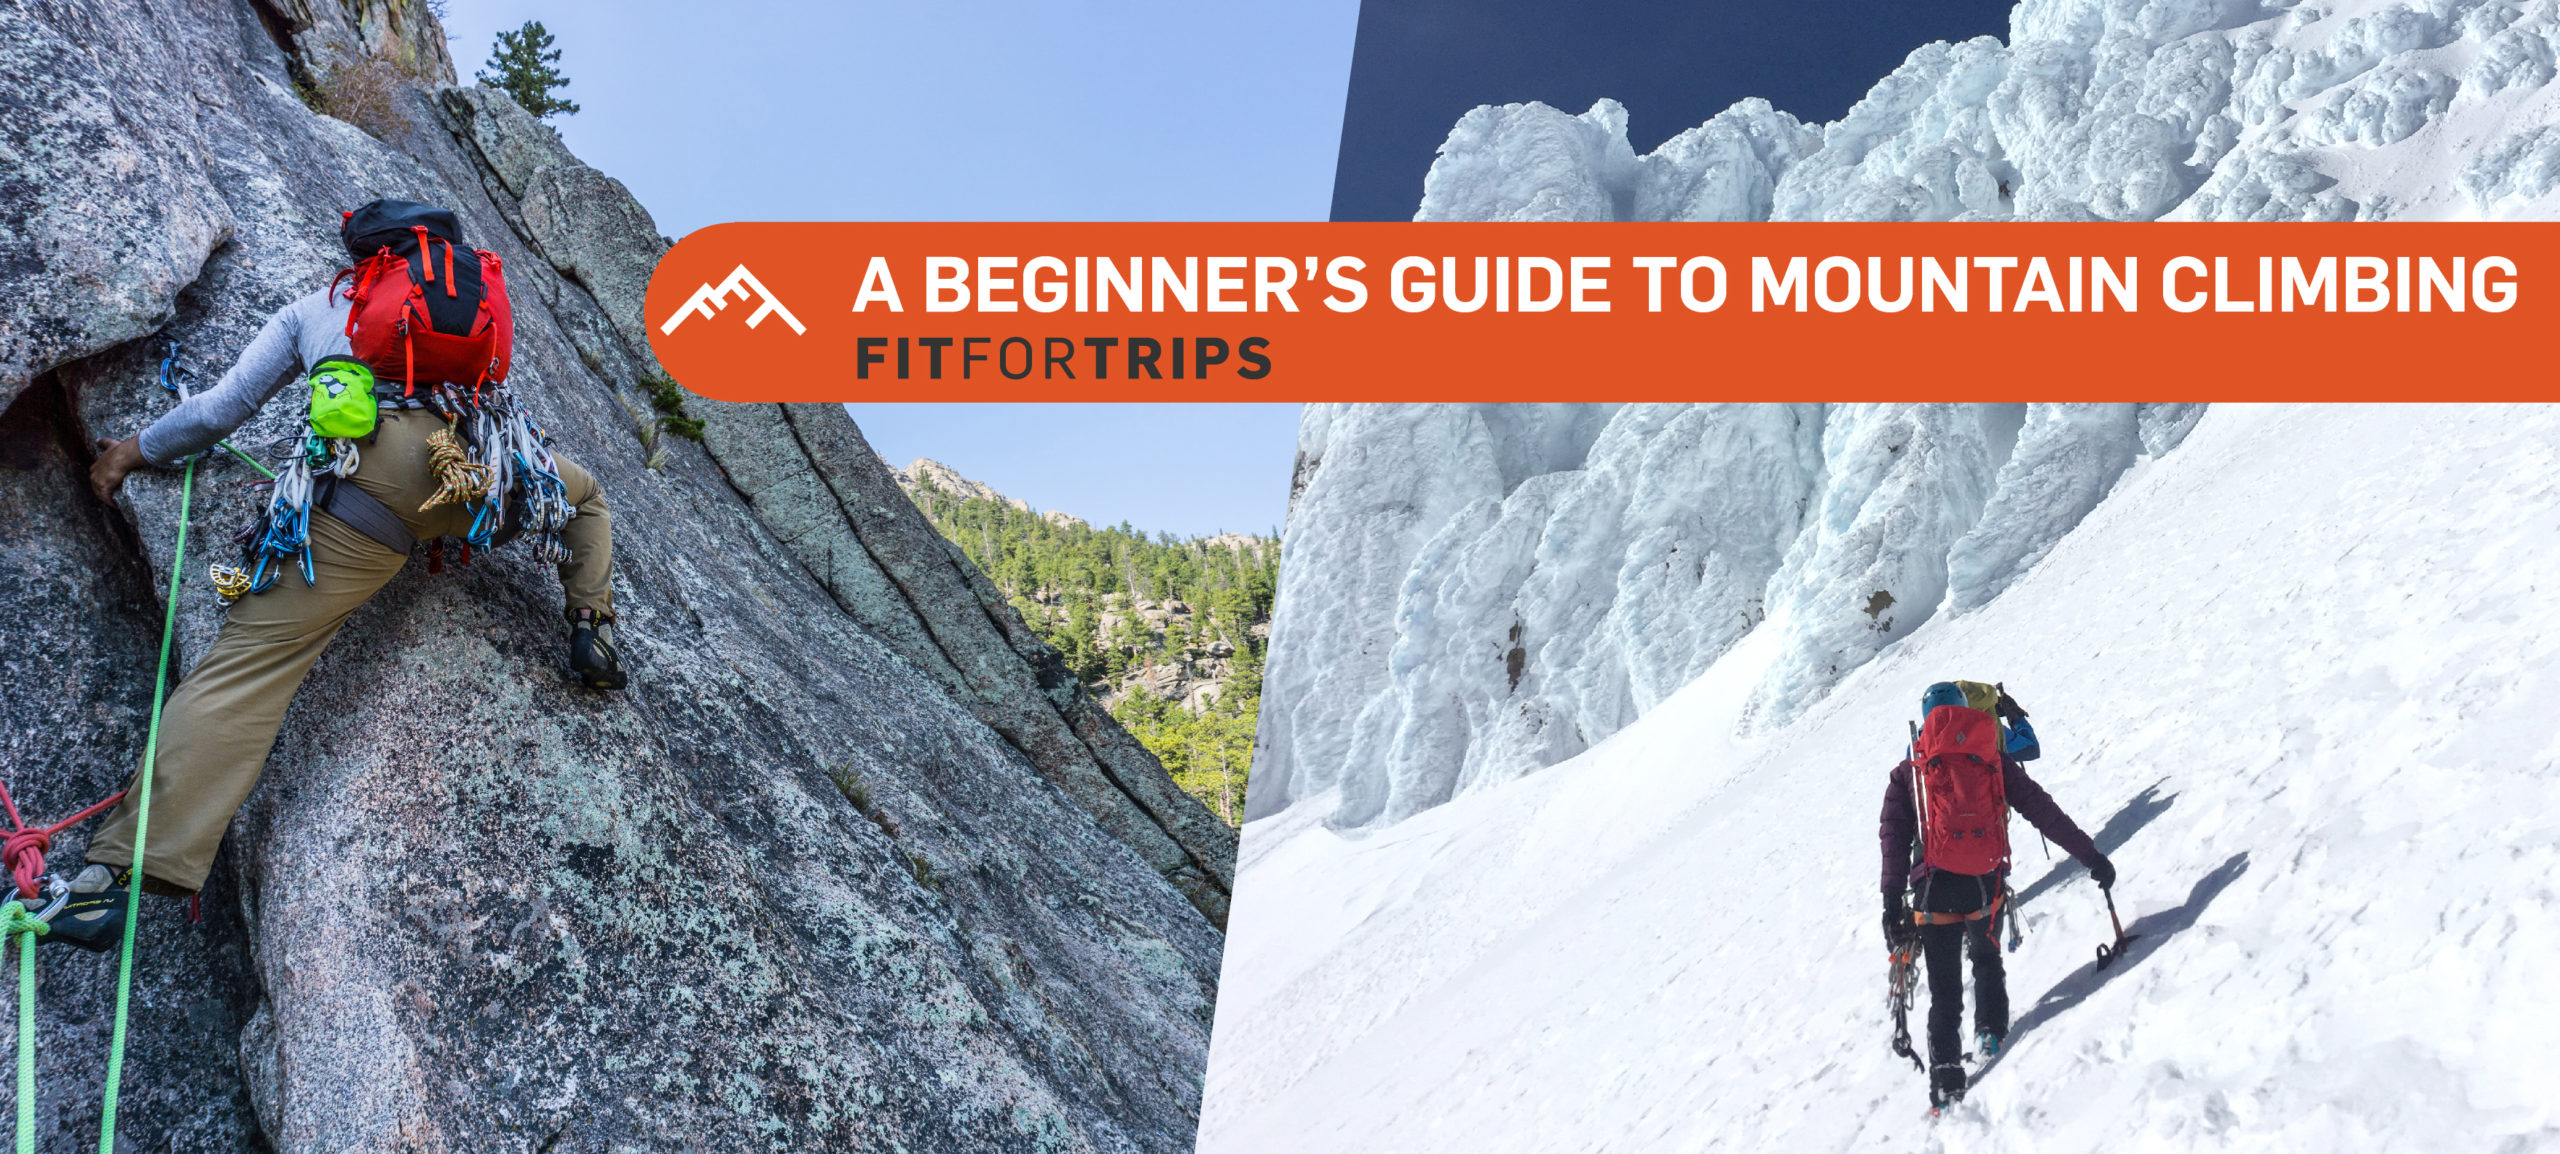 Mountain climbing demonstrating two styles for beginners.